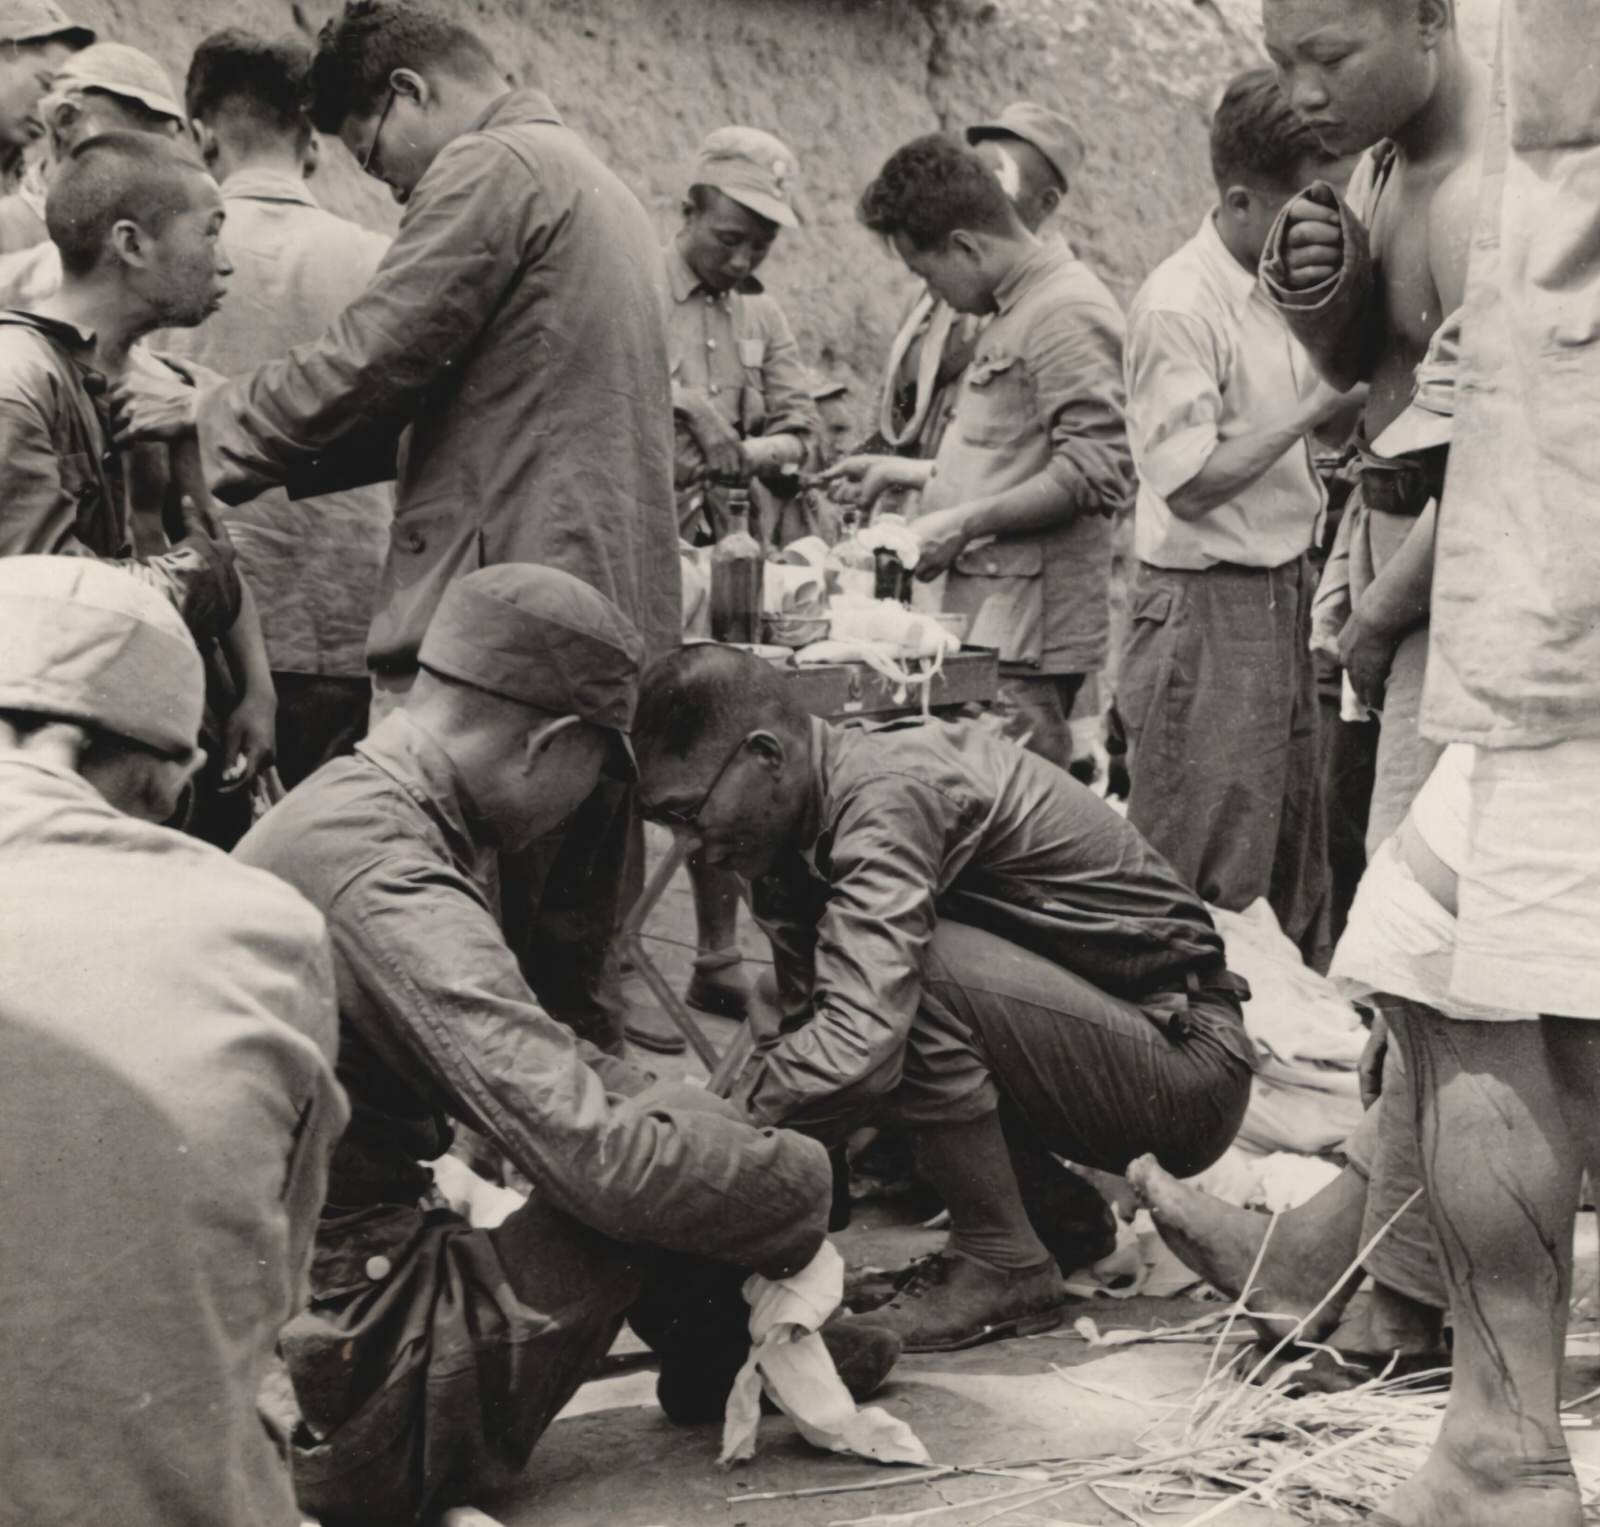 Field dressing stations of the Chinese Red Cross Medical Corps. 1937-1940